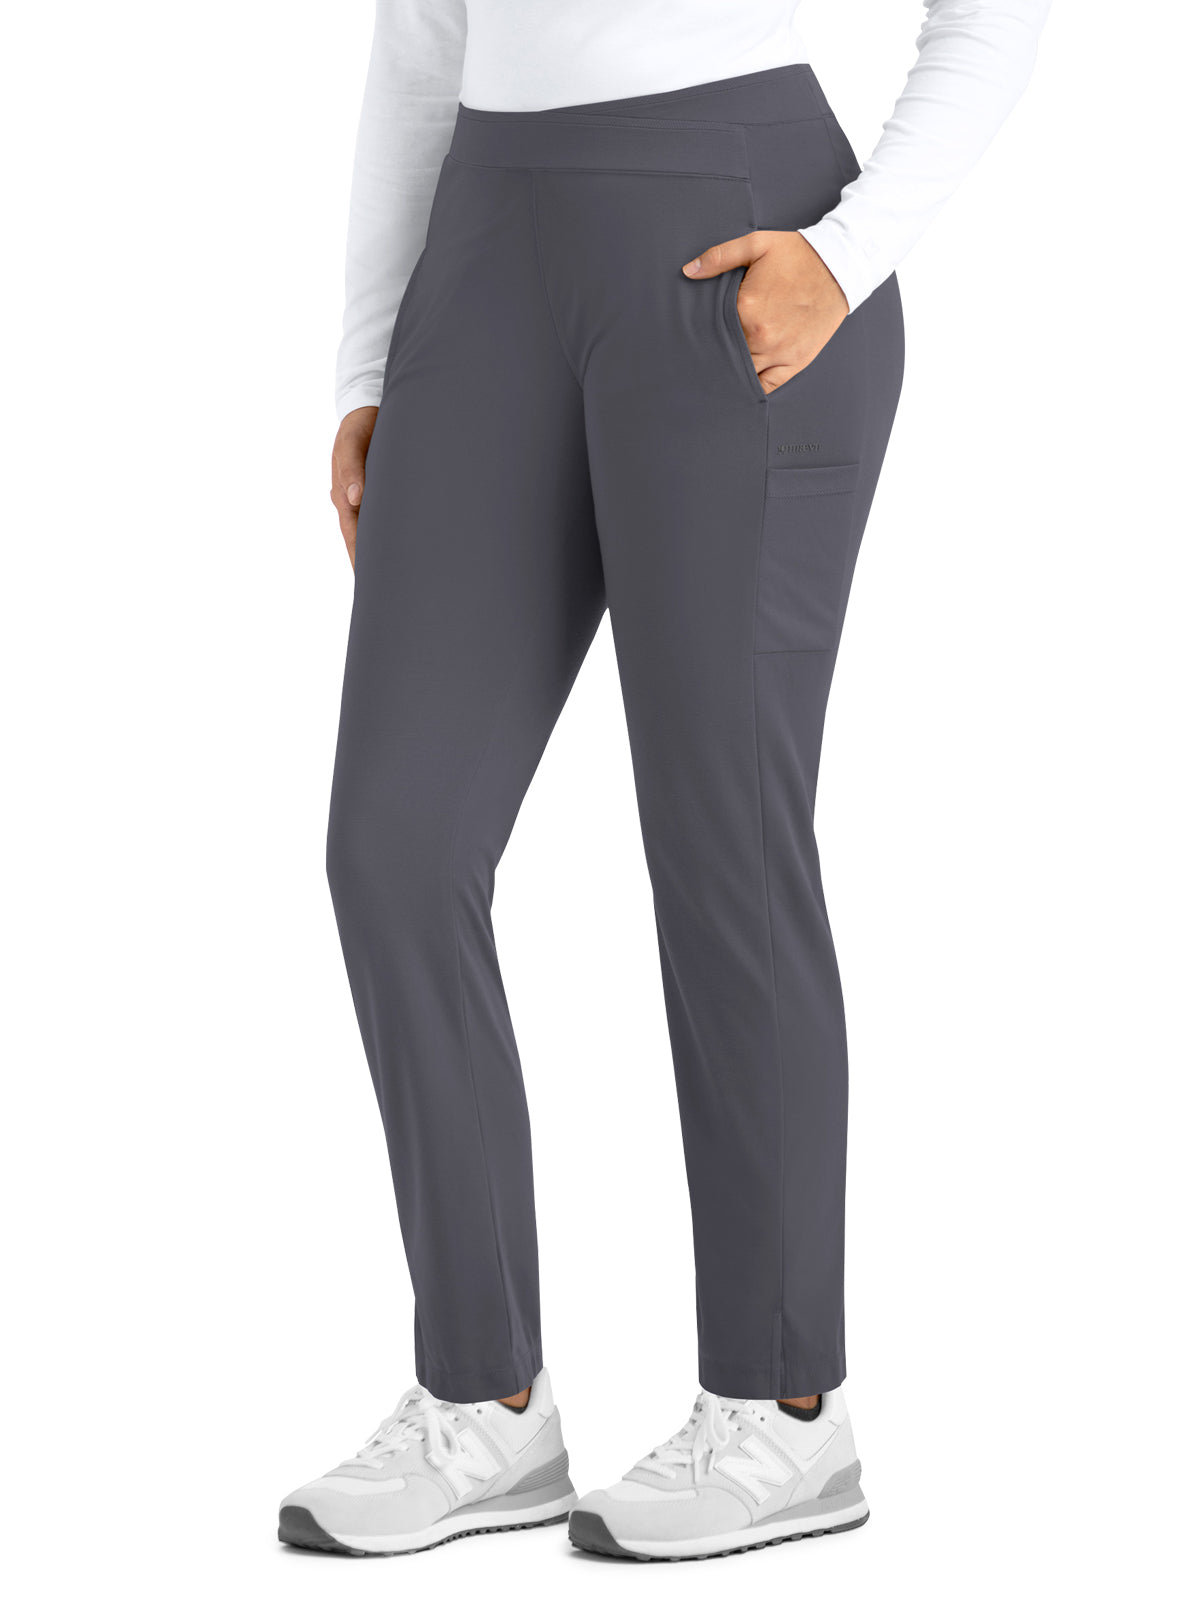 Women's Wrapped Waist Tapered Pant - 60301 - Pewter